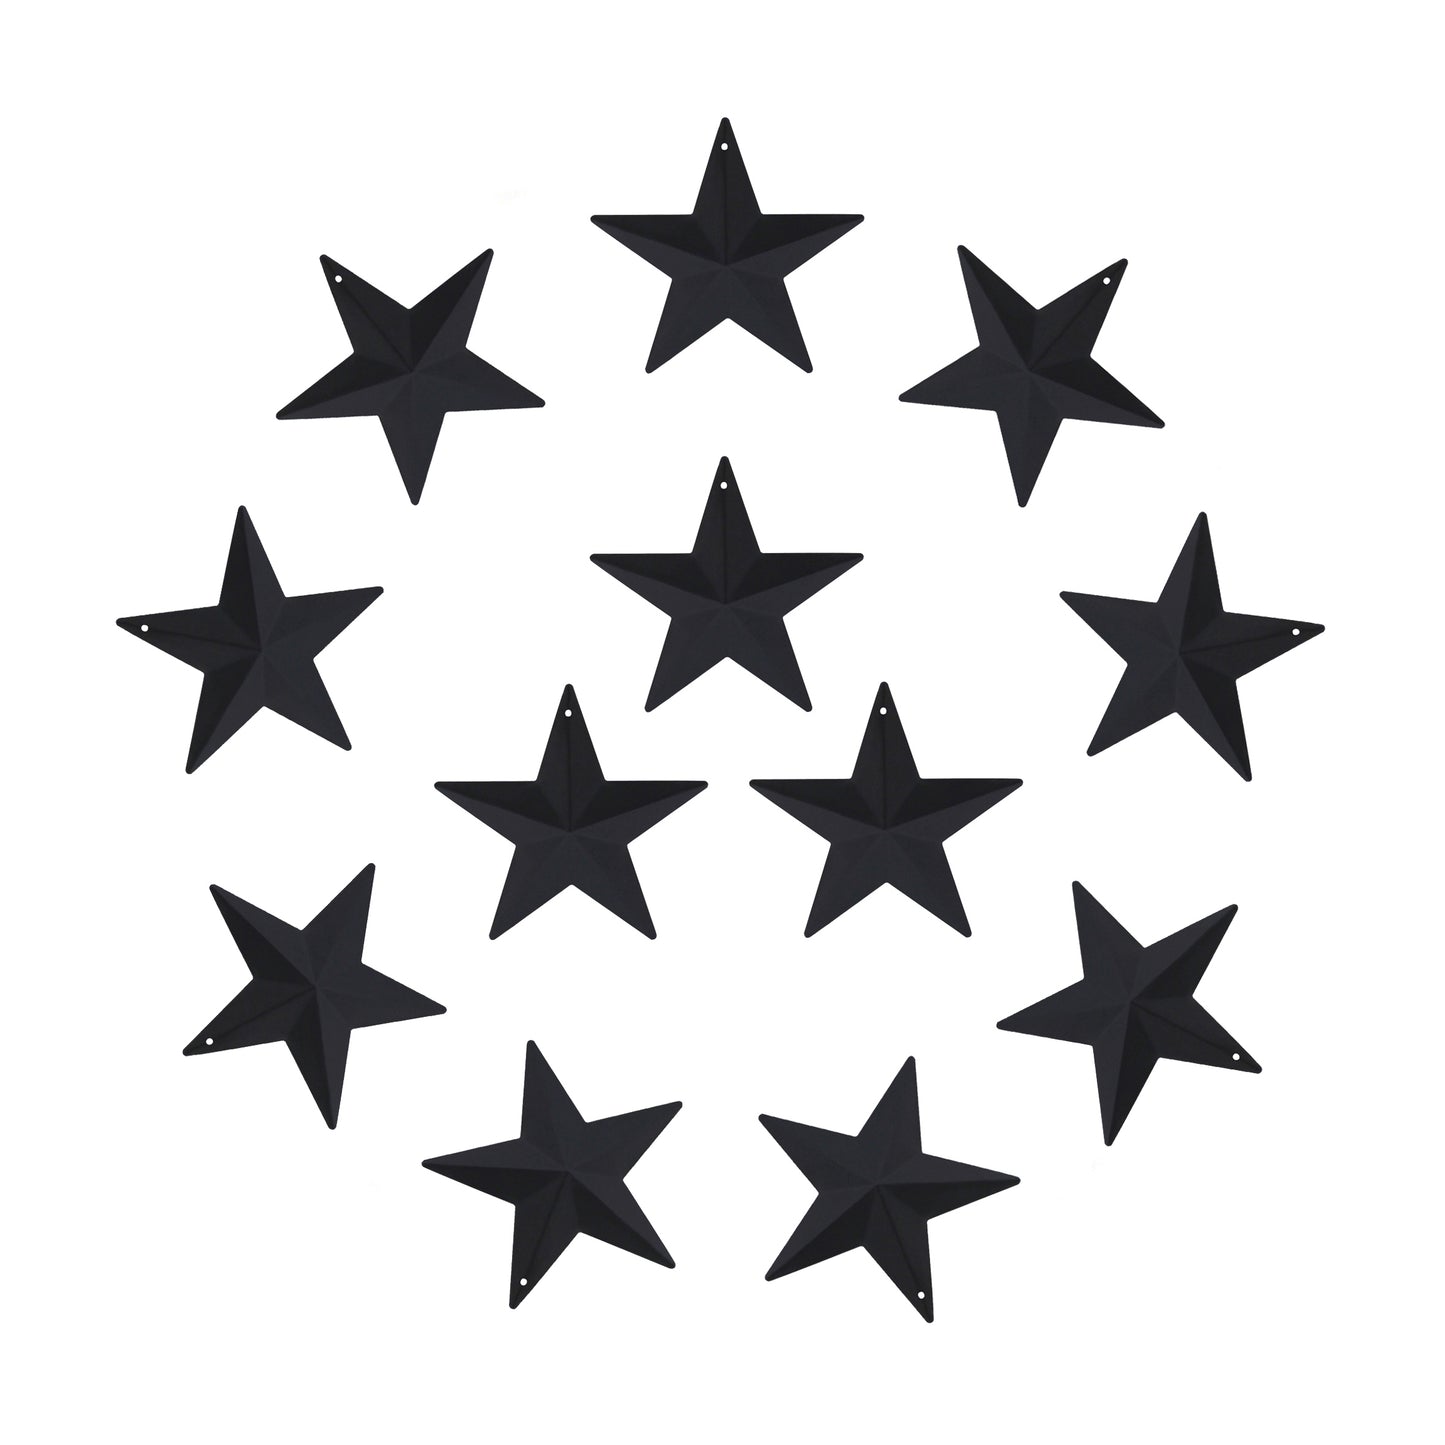 CVHOMEDECO. Country Rustic Primitive Vintage Gifts Black Small Metal Barn Star Wall/Door Decor, 2.75 Inch, Set of 12.